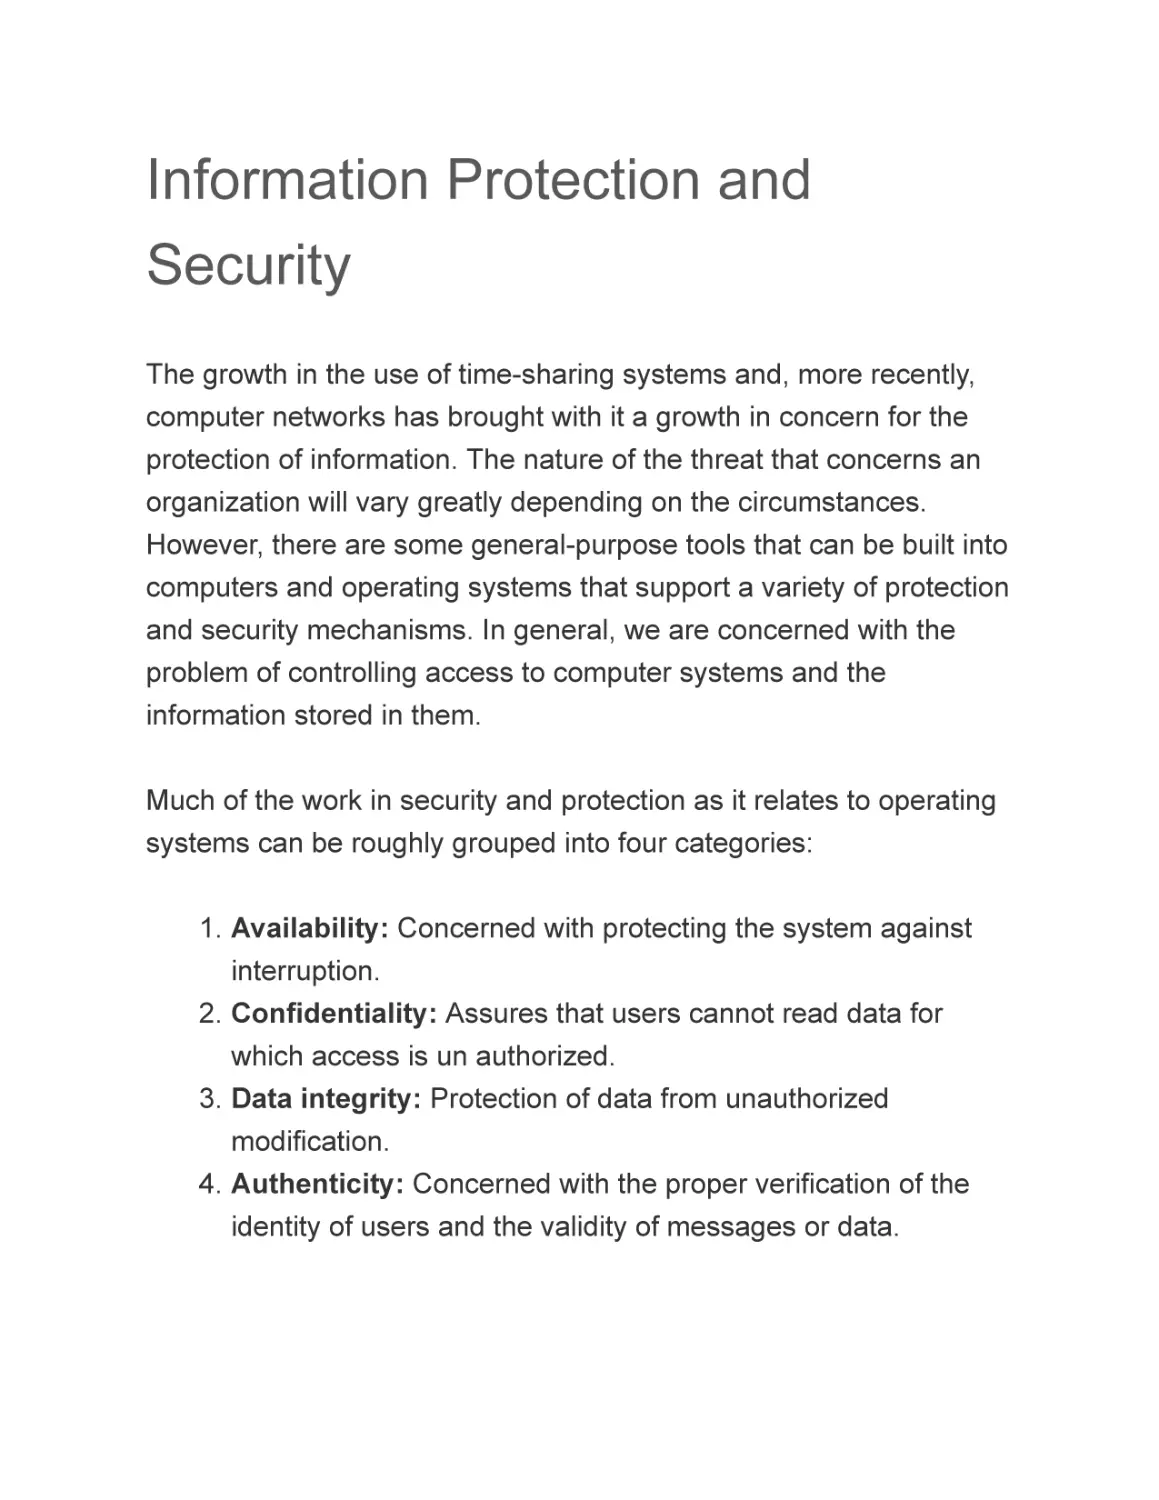 Information Protection and Security